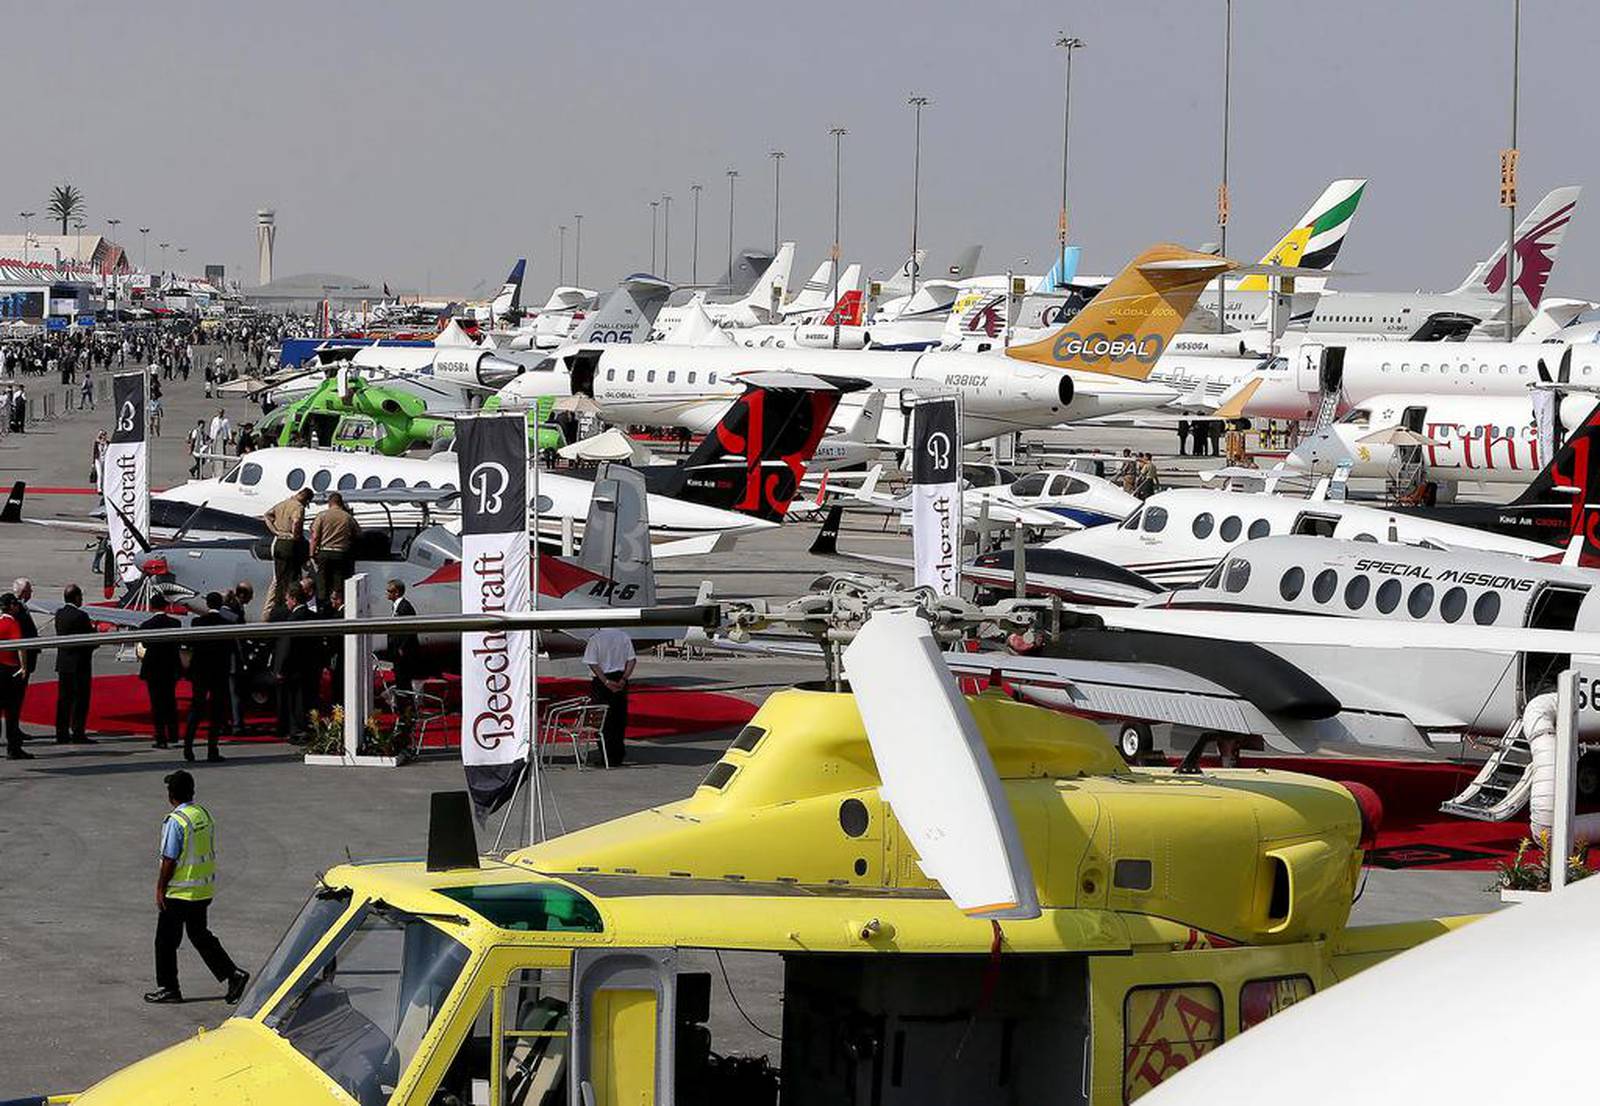 Dubai Airshow soars to the world’s top aviation event